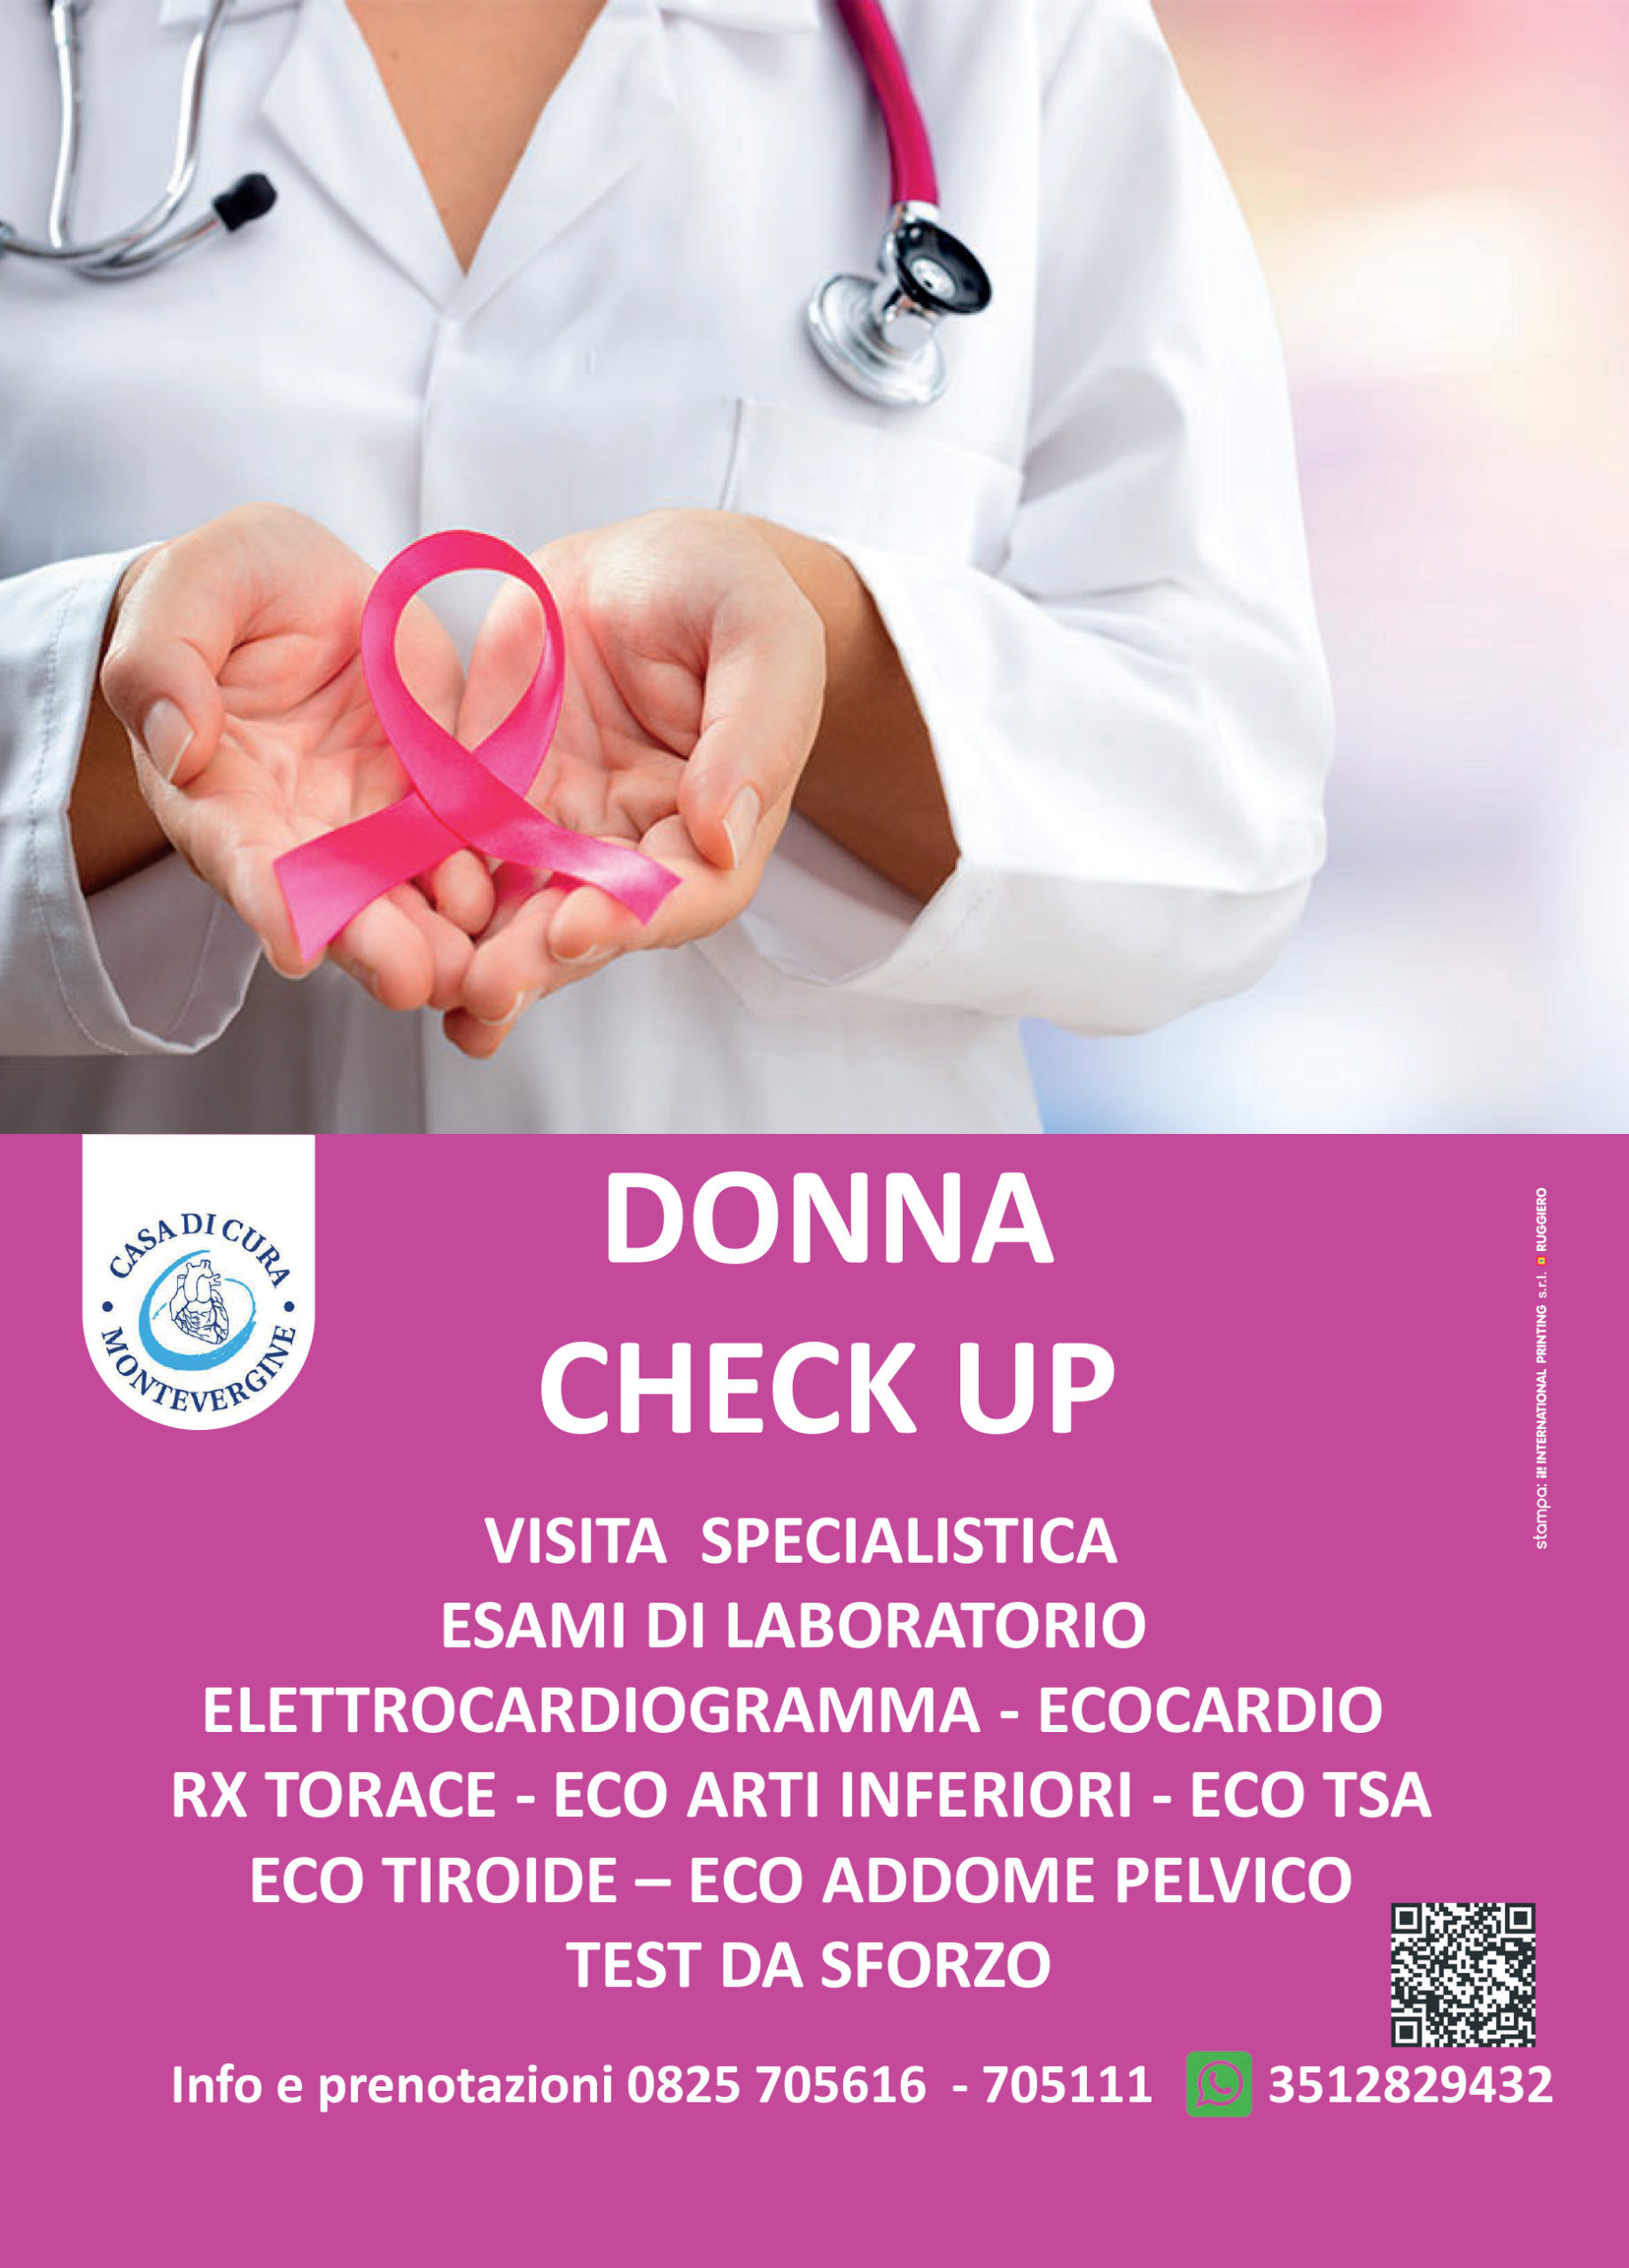  DONNA CHECK-UP